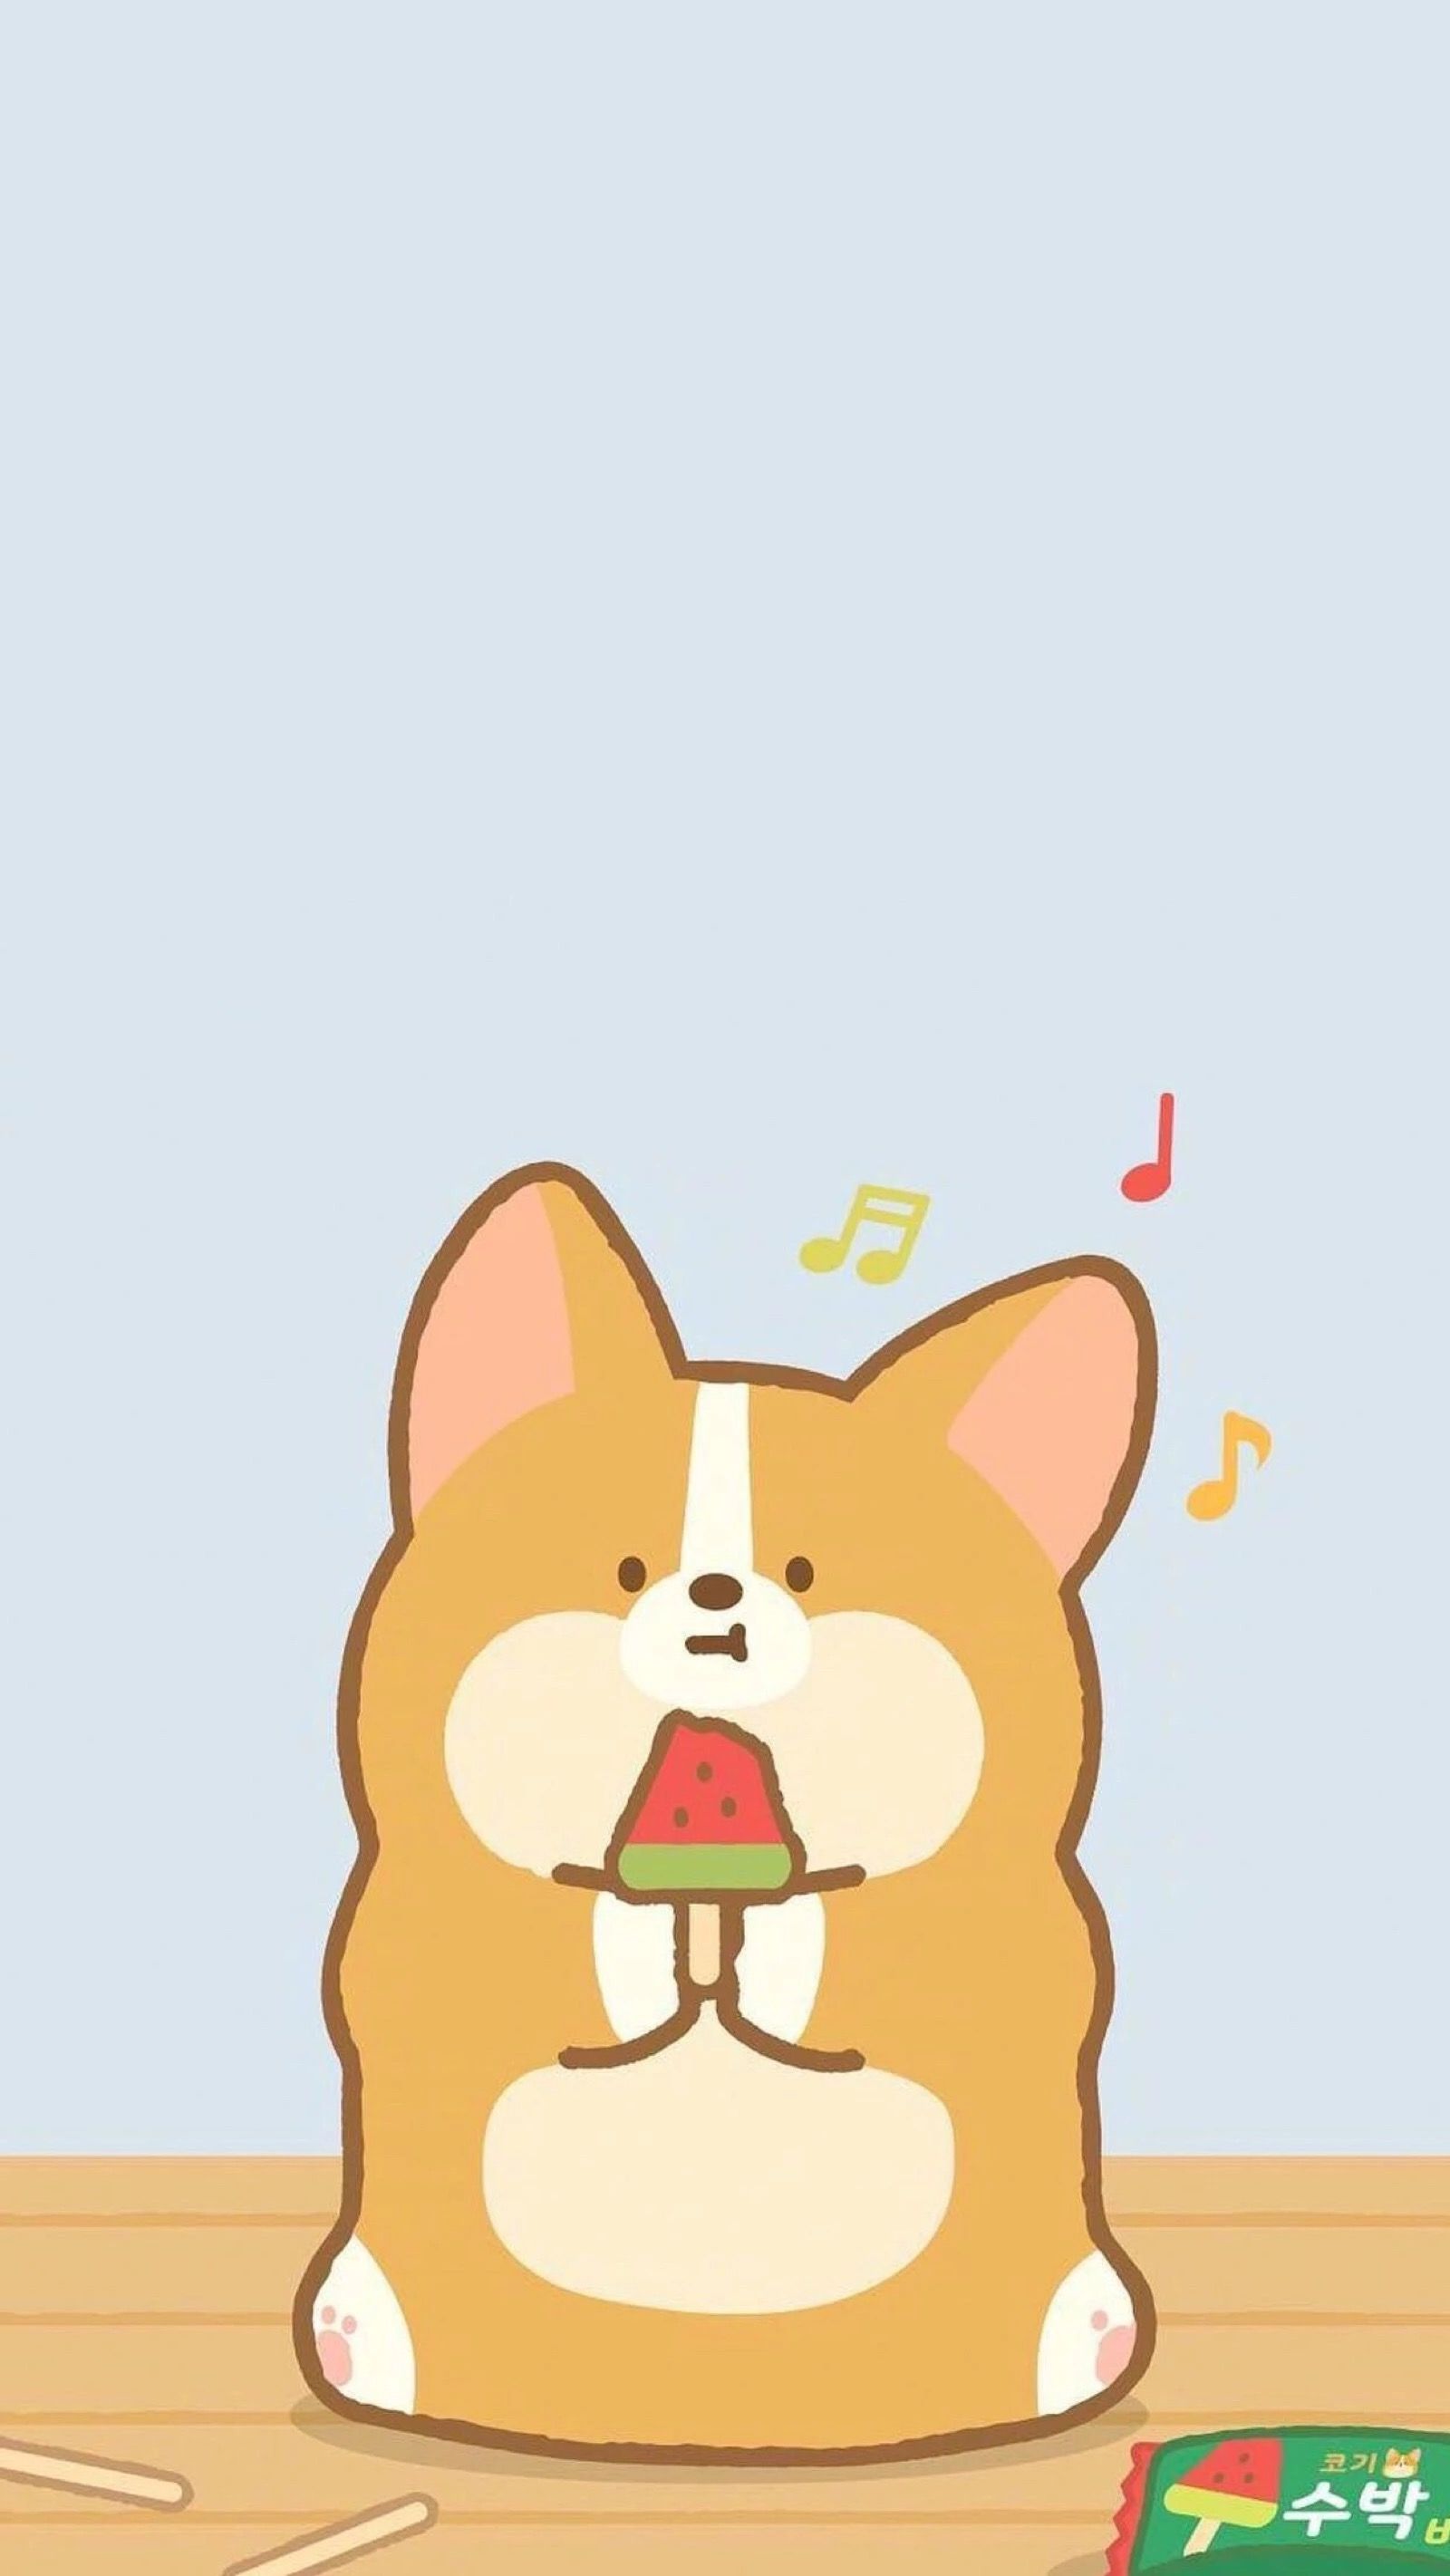 Kawaii Corgi Images Browse 1710 Stock Photos  Vectors Free Download with  Trial  Shutterstock